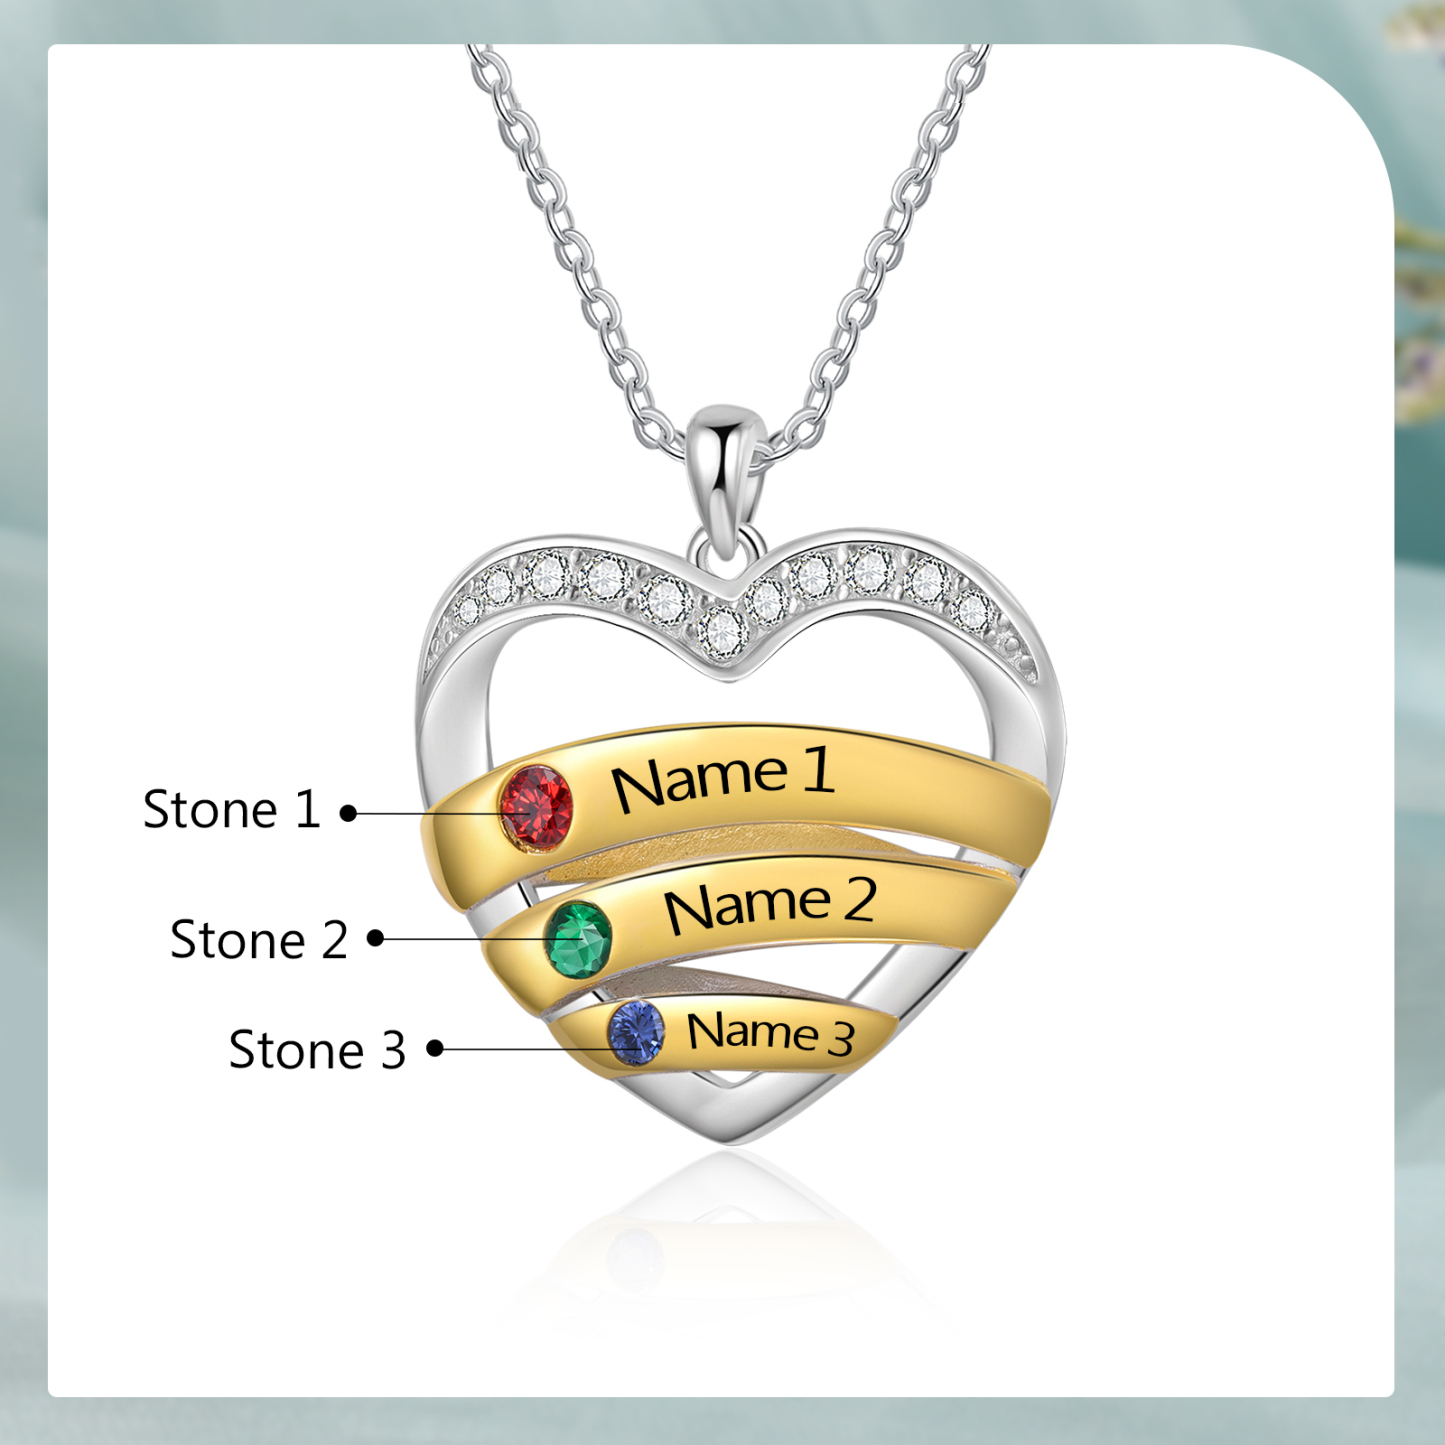 3 Names - Personalized Beautiful Heart Necklace with Custom Name and Birthstone, As a Mother's Day Gift for Mom